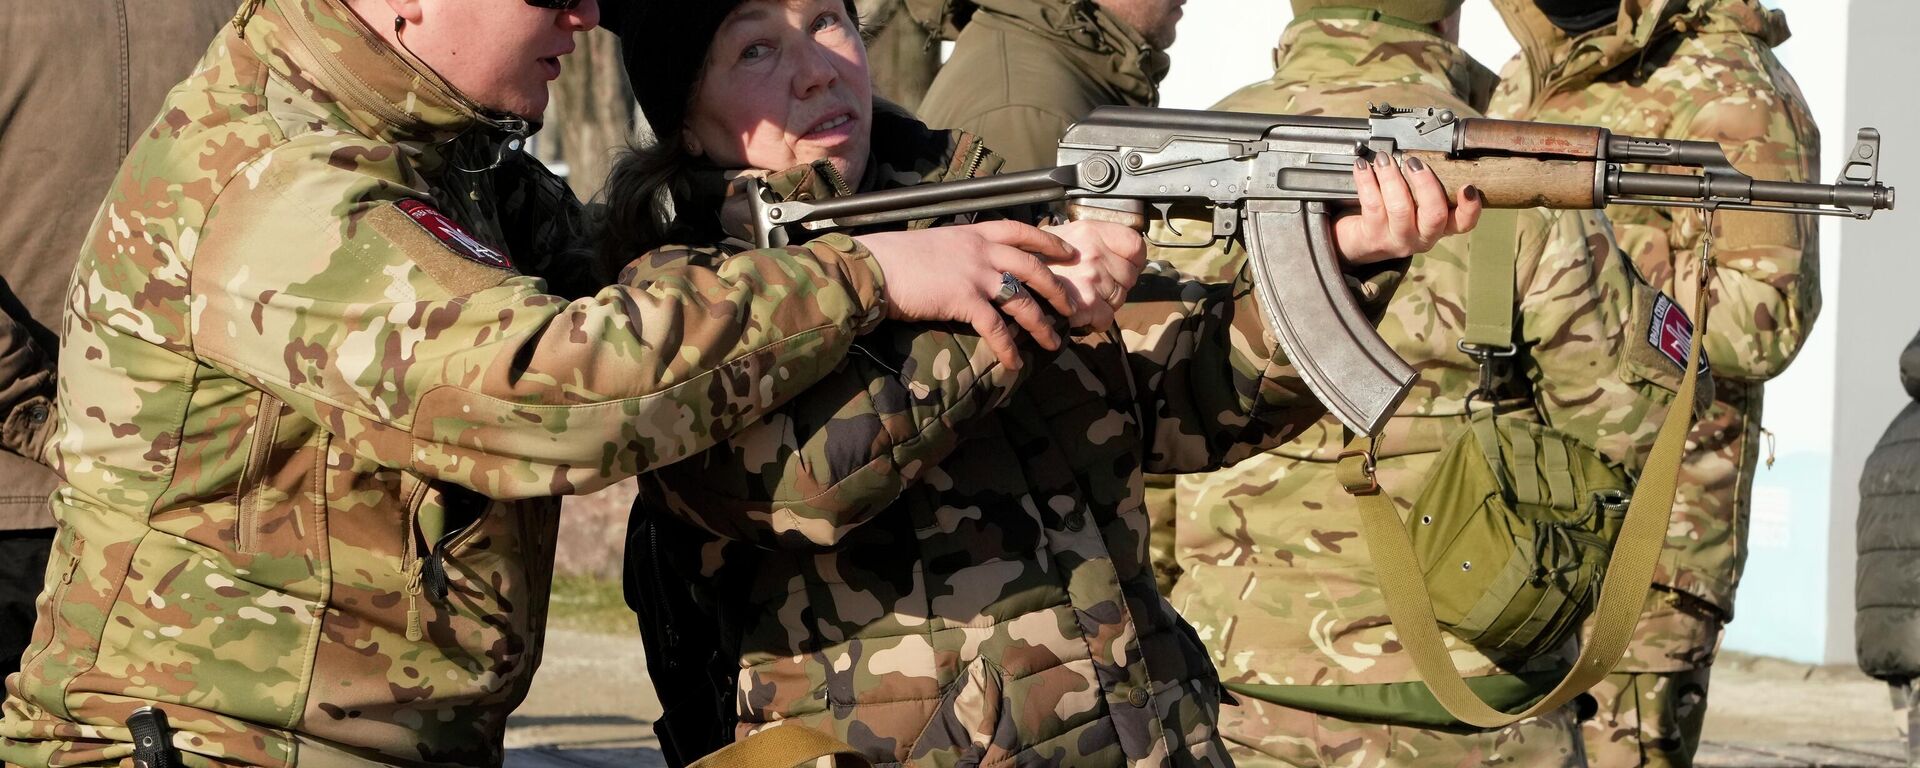 An instructor shows a woman how to use a Kalashnikov assault rifle, as members of a Ukrainian far-right group train, in Kyiv, Ukraine, Sunday, Feb. 13, 2022. Russia denies it intends to invade but has massed well over 100,000 troops near the Ukrainian border and has sent troops to exercises in neighboring Belarus, encircling Ukraine on three sides. U.S. officials say Russia's buildup of firepower has reached the point where it could invade on short notice. - Sputnik International, 1920, 25.11.2022